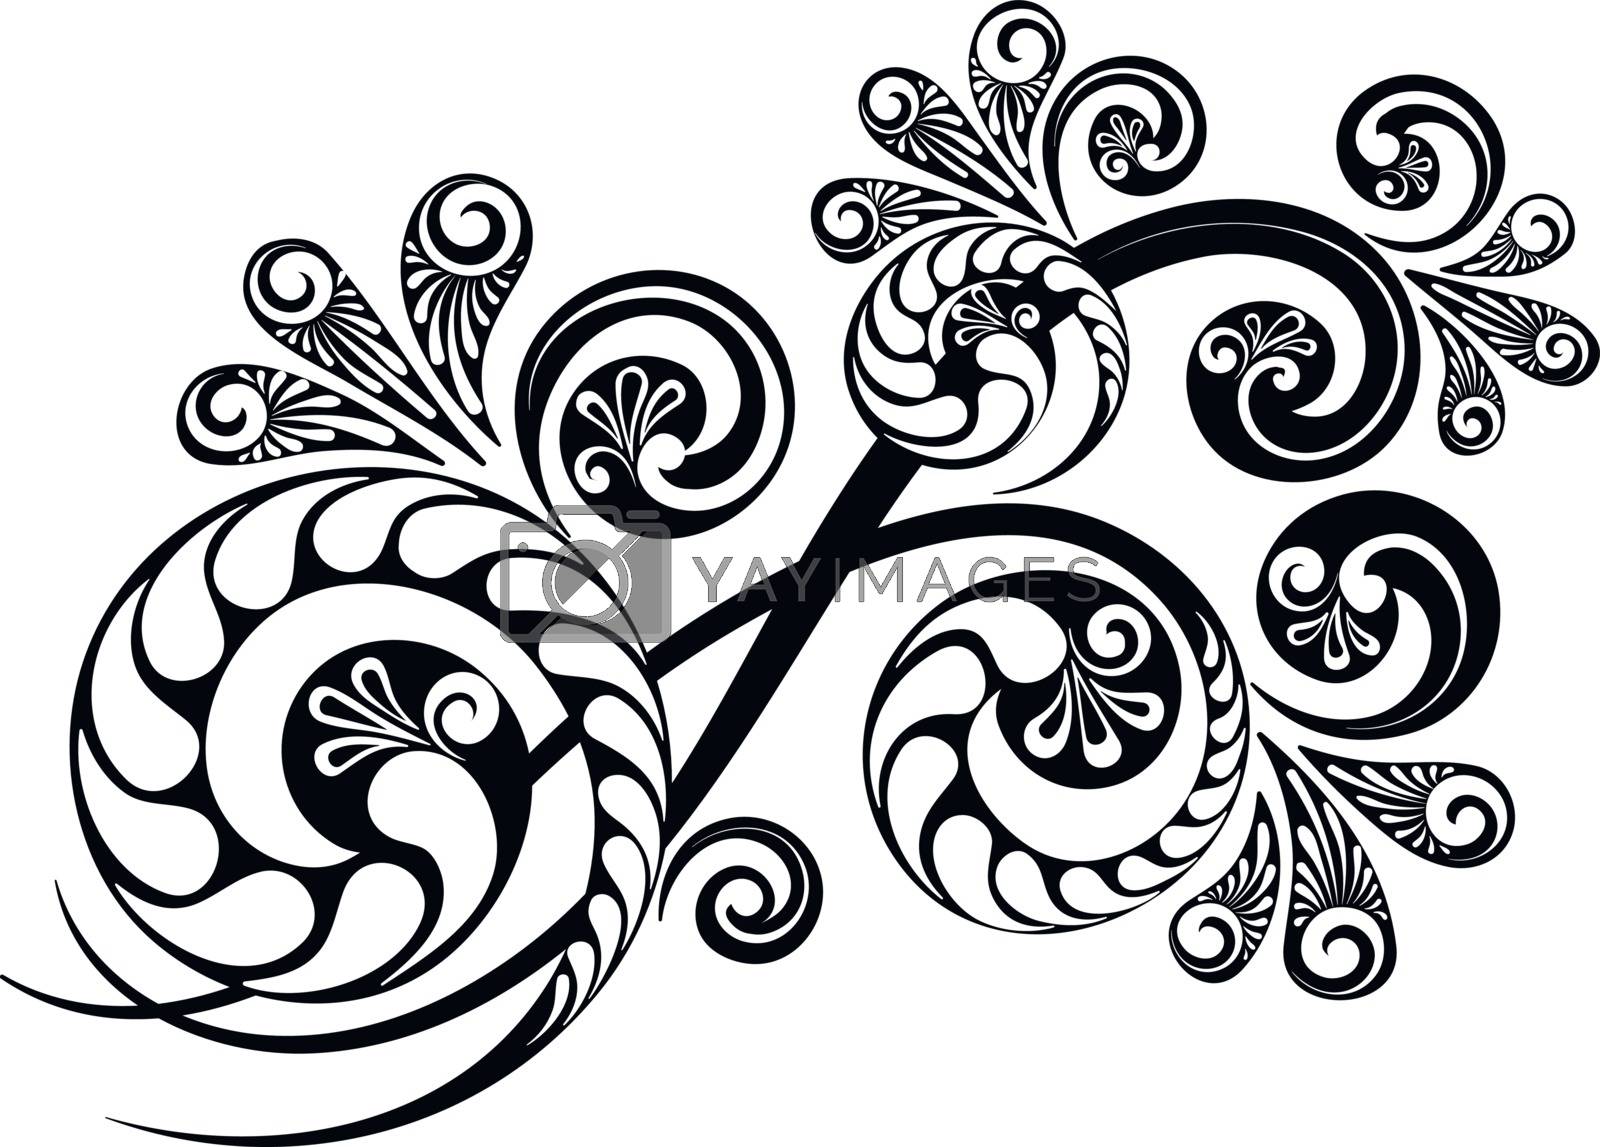 Royalty free image of Floral branching ornament by ayax